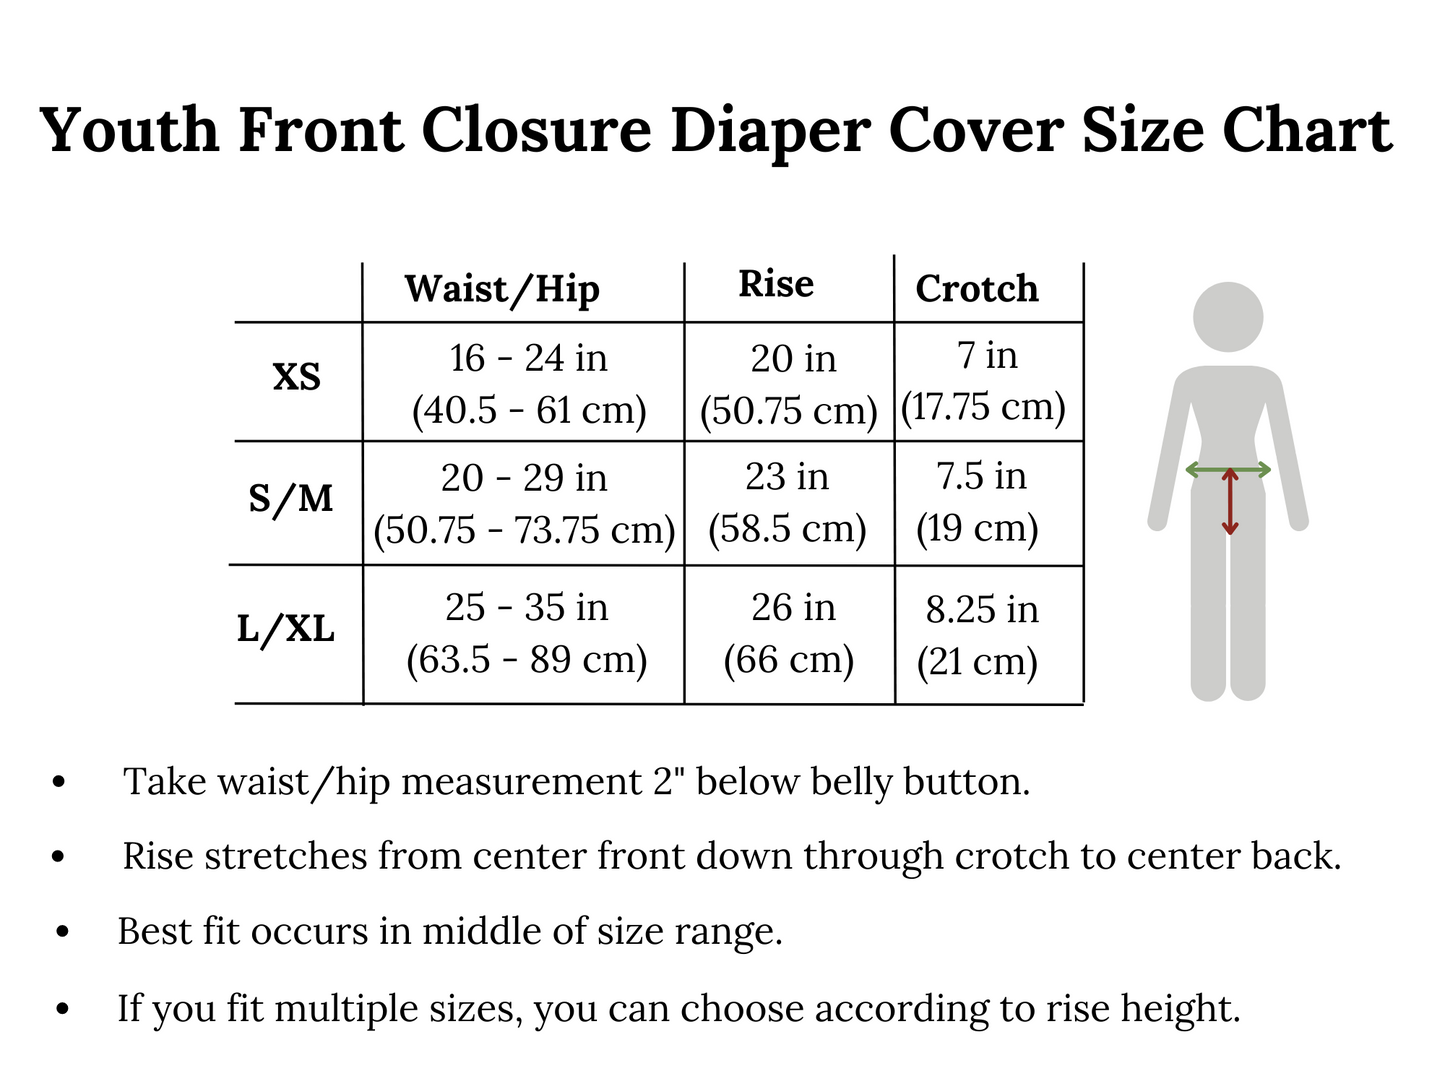 Youth Front Closure Diaper Cover Sewing Pattern